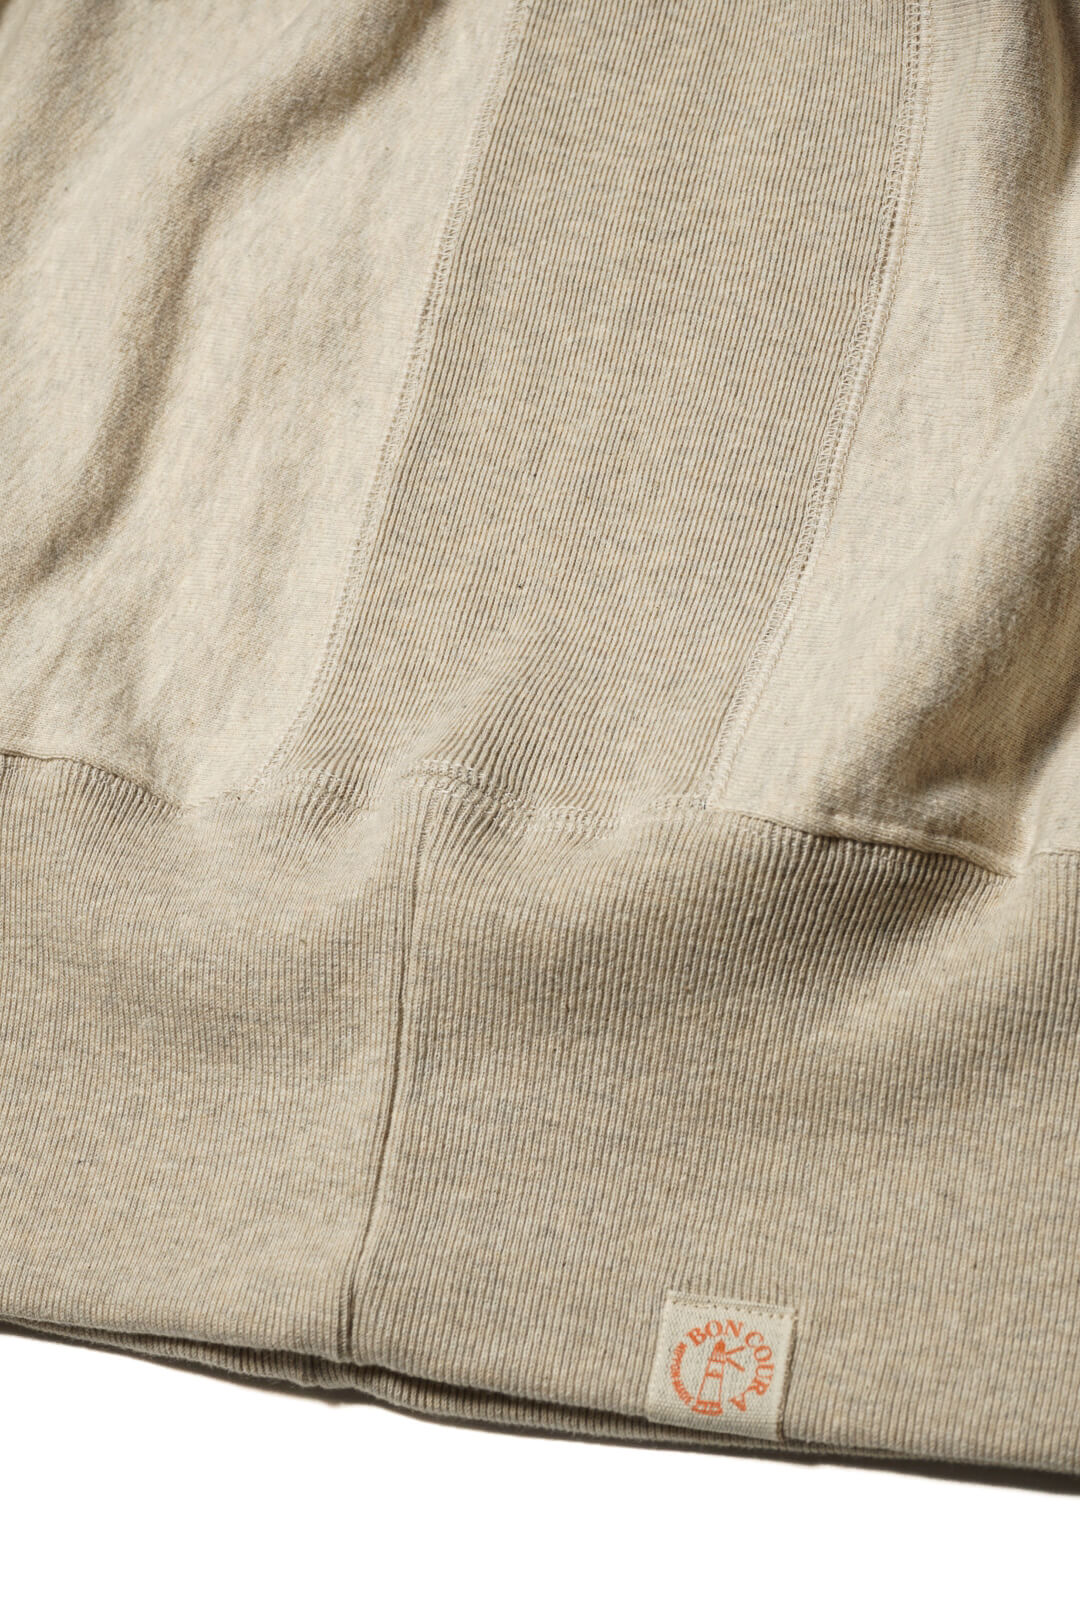 S/S SWEAT SHIRT - ARCH EXCLUSIVE（OATMEAL）